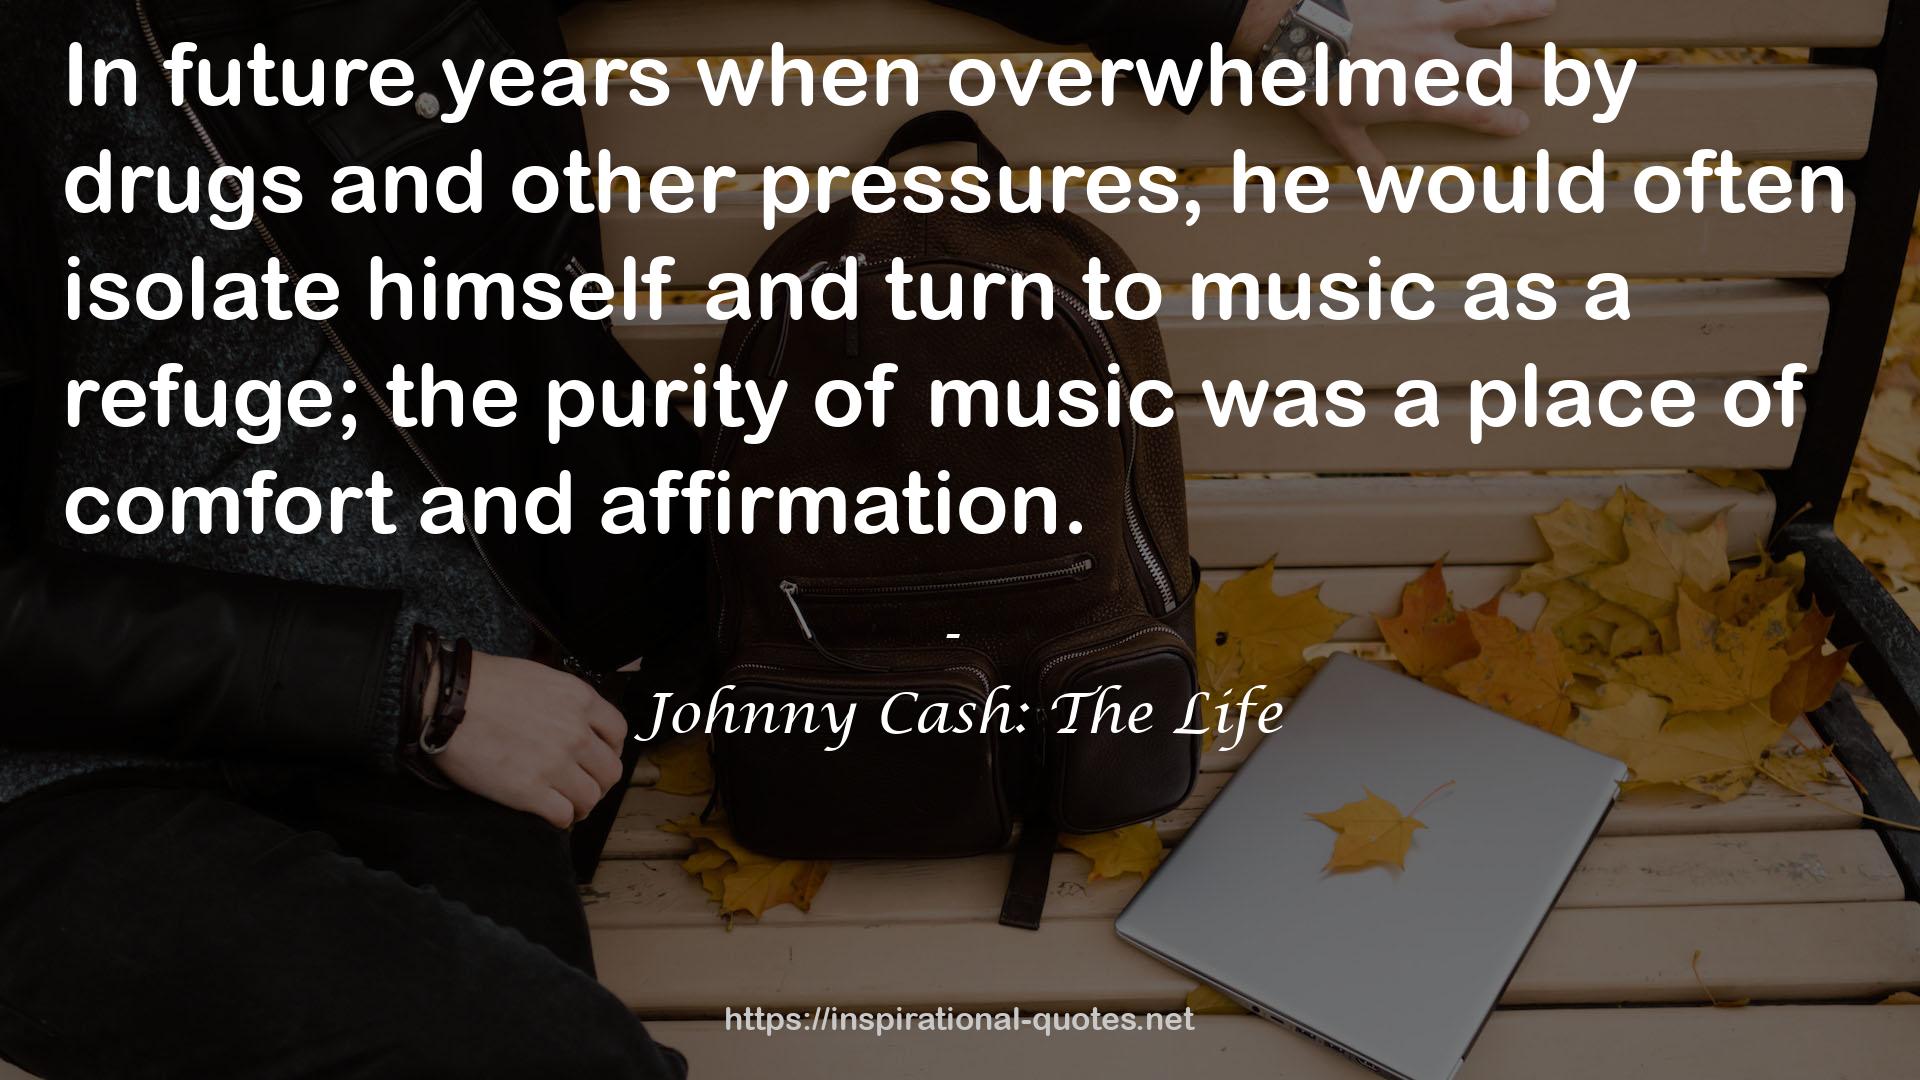 Johnny Cash: The Life QUOTES